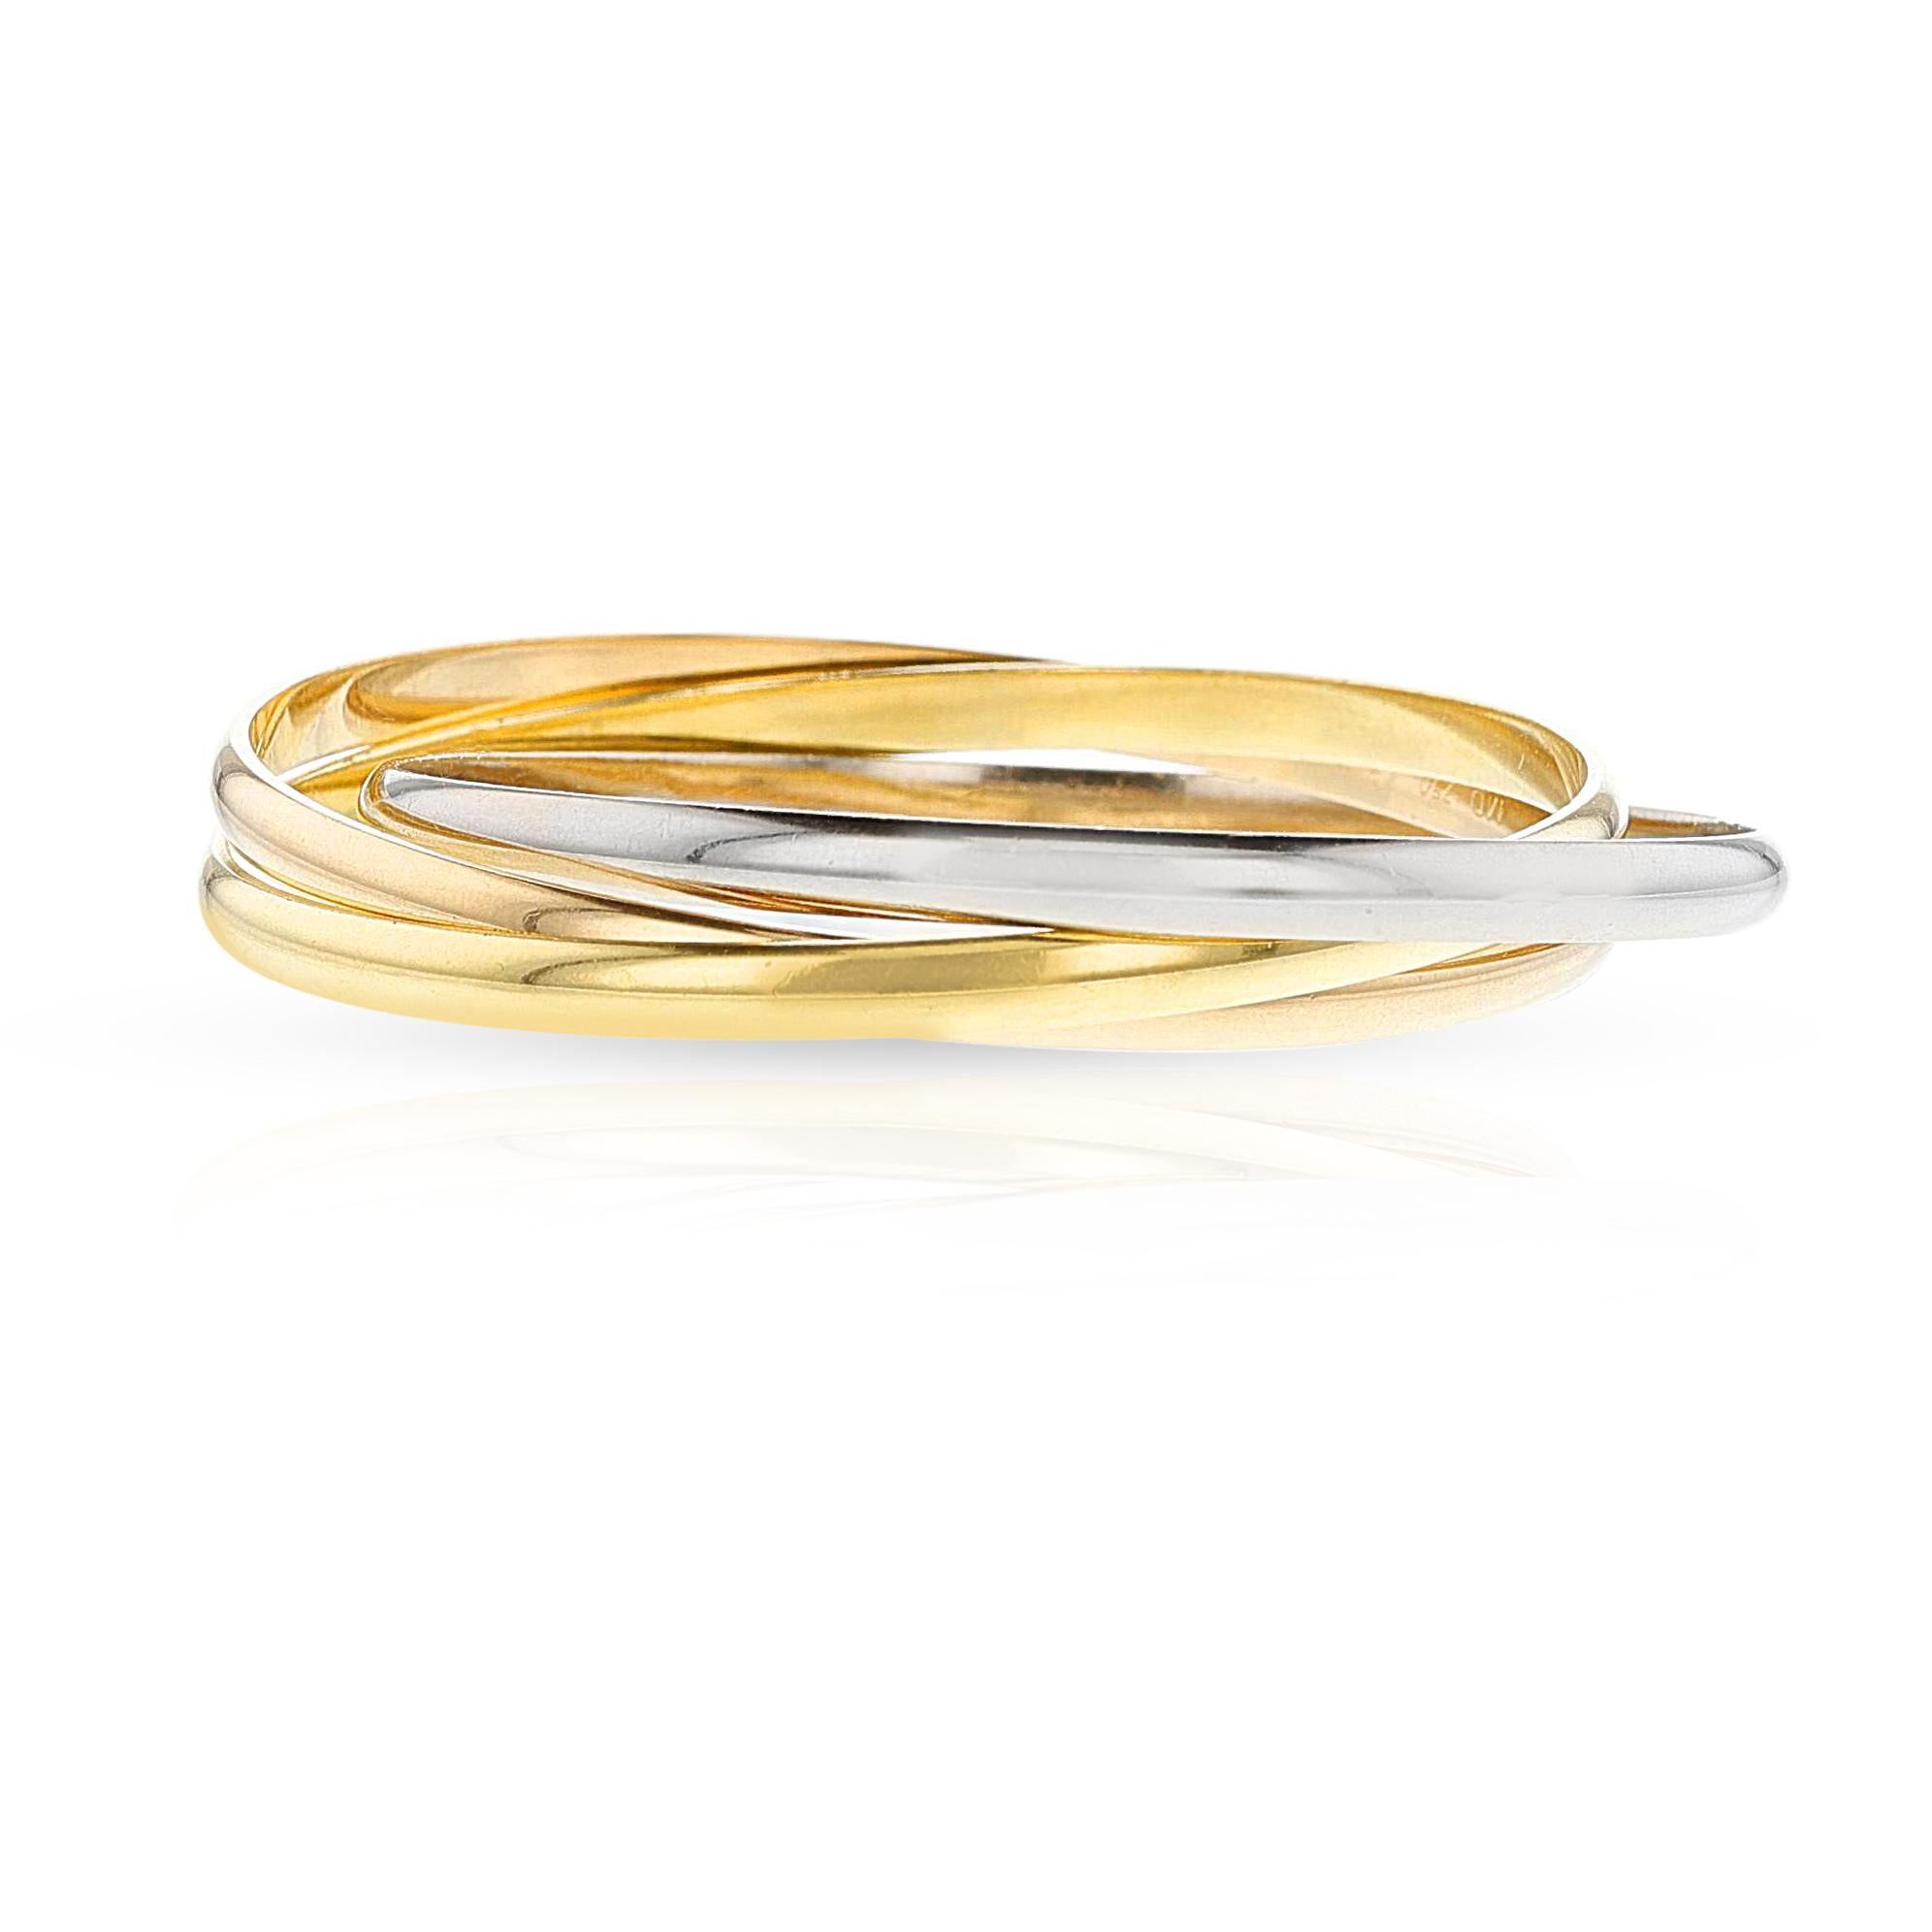 A Cartier Trinity Bangle, 18k Rose, White and Yellow Gold. 68.70 grams. Signed and numbered. 